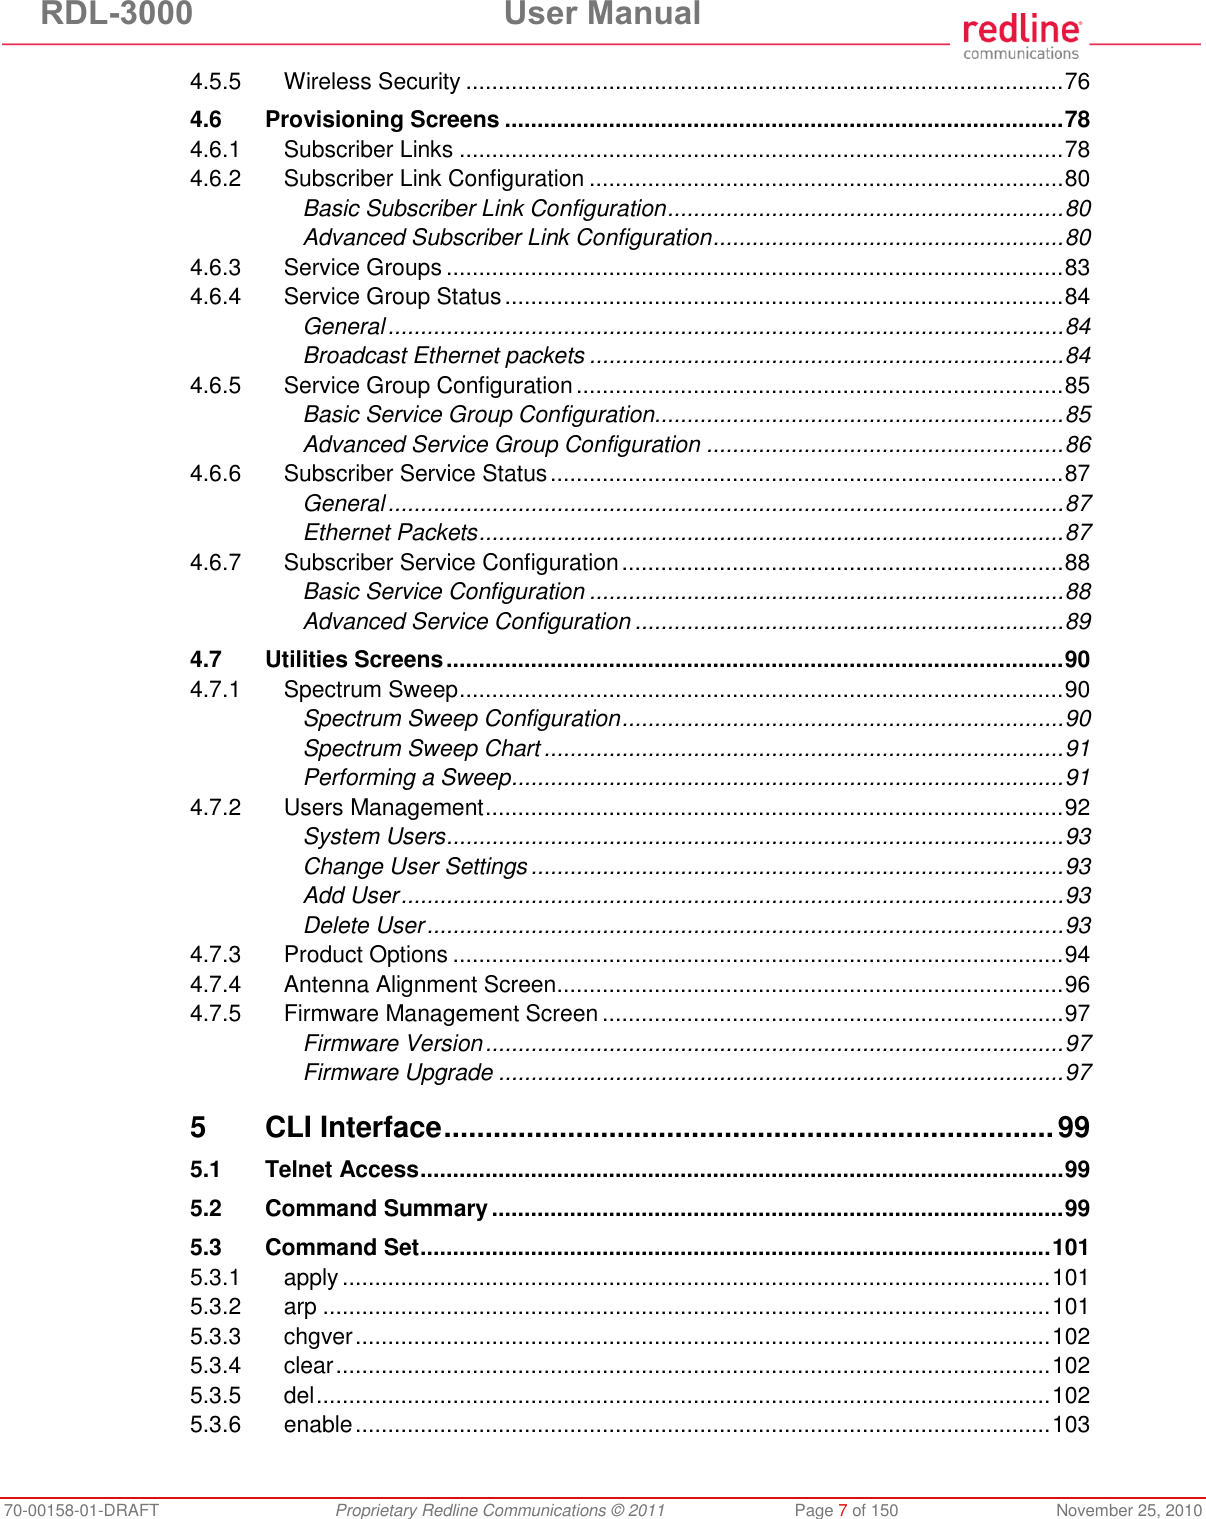 RDL-3000  User Manual 70-00158-01-DRAFT  Proprietary Redline Communications © 2011  Page 7 of 150  November 25, 2010 4.5.5 Wireless Security ............................................................................................ 76 4.6 Provisioning Screens ...................................................................................... 78 4.6.1 Subscriber Links ............................................................................................. 78 4.6.2 Subscriber Link Configuration ......................................................................... 80 Basic Subscriber Link Configuration ............................................................. 80 Advanced Subscriber Link Configuration ...................................................... 80 4.6.3 Service Groups ............................................................................................... 83 4.6.4 Service Group Status ...................................................................................... 84 General ........................................................................................................ 84 Broadcast Ethernet packets ......................................................................... 84 4.6.5 Service Group Configuration ........................................................................... 85 Basic Service Group Configuration............................................................... 85 Advanced Service Group Configuration ....................................................... 86 4.6.6 Subscriber Service Status ............................................................................... 87 General ........................................................................................................ 87 Ethernet Packets .......................................................................................... 87 4.6.7 Subscriber Service Configuration .................................................................... 88 Basic Service Configuration ......................................................................... 88 Advanced Service Configuration .................................................................. 89 4.7 Utilities Screens ............................................................................................... 90 4.7.1 Spectrum Sweep ............................................................................................. 90 Spectrum Sweep Configuration .................................................................... 90 Spectrum Sweep Chart ................................................................................ 91 Performing a Sweep ..................................................................................... 91 4.7.2 Users Management ......................................................................................... 92 System Users ............................................................................................... 93 Change User Settings .................................................................................. 93 Add User ...................................................................................................... 93 Delete User .................................................................................................. 93 4.7.3 Product Options .............................................................................................. 94 4.7.4 Antenna Alignment Screen.............................................................................. 96 4.7.5 Firmware Management Screen ....................................................................... 97 Firmware Version ......................................................................................... 97 Firmware Upgrade ....................................................................................... 97 5 CLI Interface .......................................................................... 99 5.1 Telnet Access ................................................................................................... 99 5.2 Command Summary ........................................................................................ 99 5.3 Command Set ................................................................................................. 101 5.3.1 apply ............................................................................................................. 101 5.3.2 arp ................................................................................................................ 101 5.3.3 chgver ........................................................................................................... 102 5.3.4 clear .............................................................................................................. 102 5.3.5 del ................................................................................................................. 102 5.3.6 enable ........................................................................................................... 103 